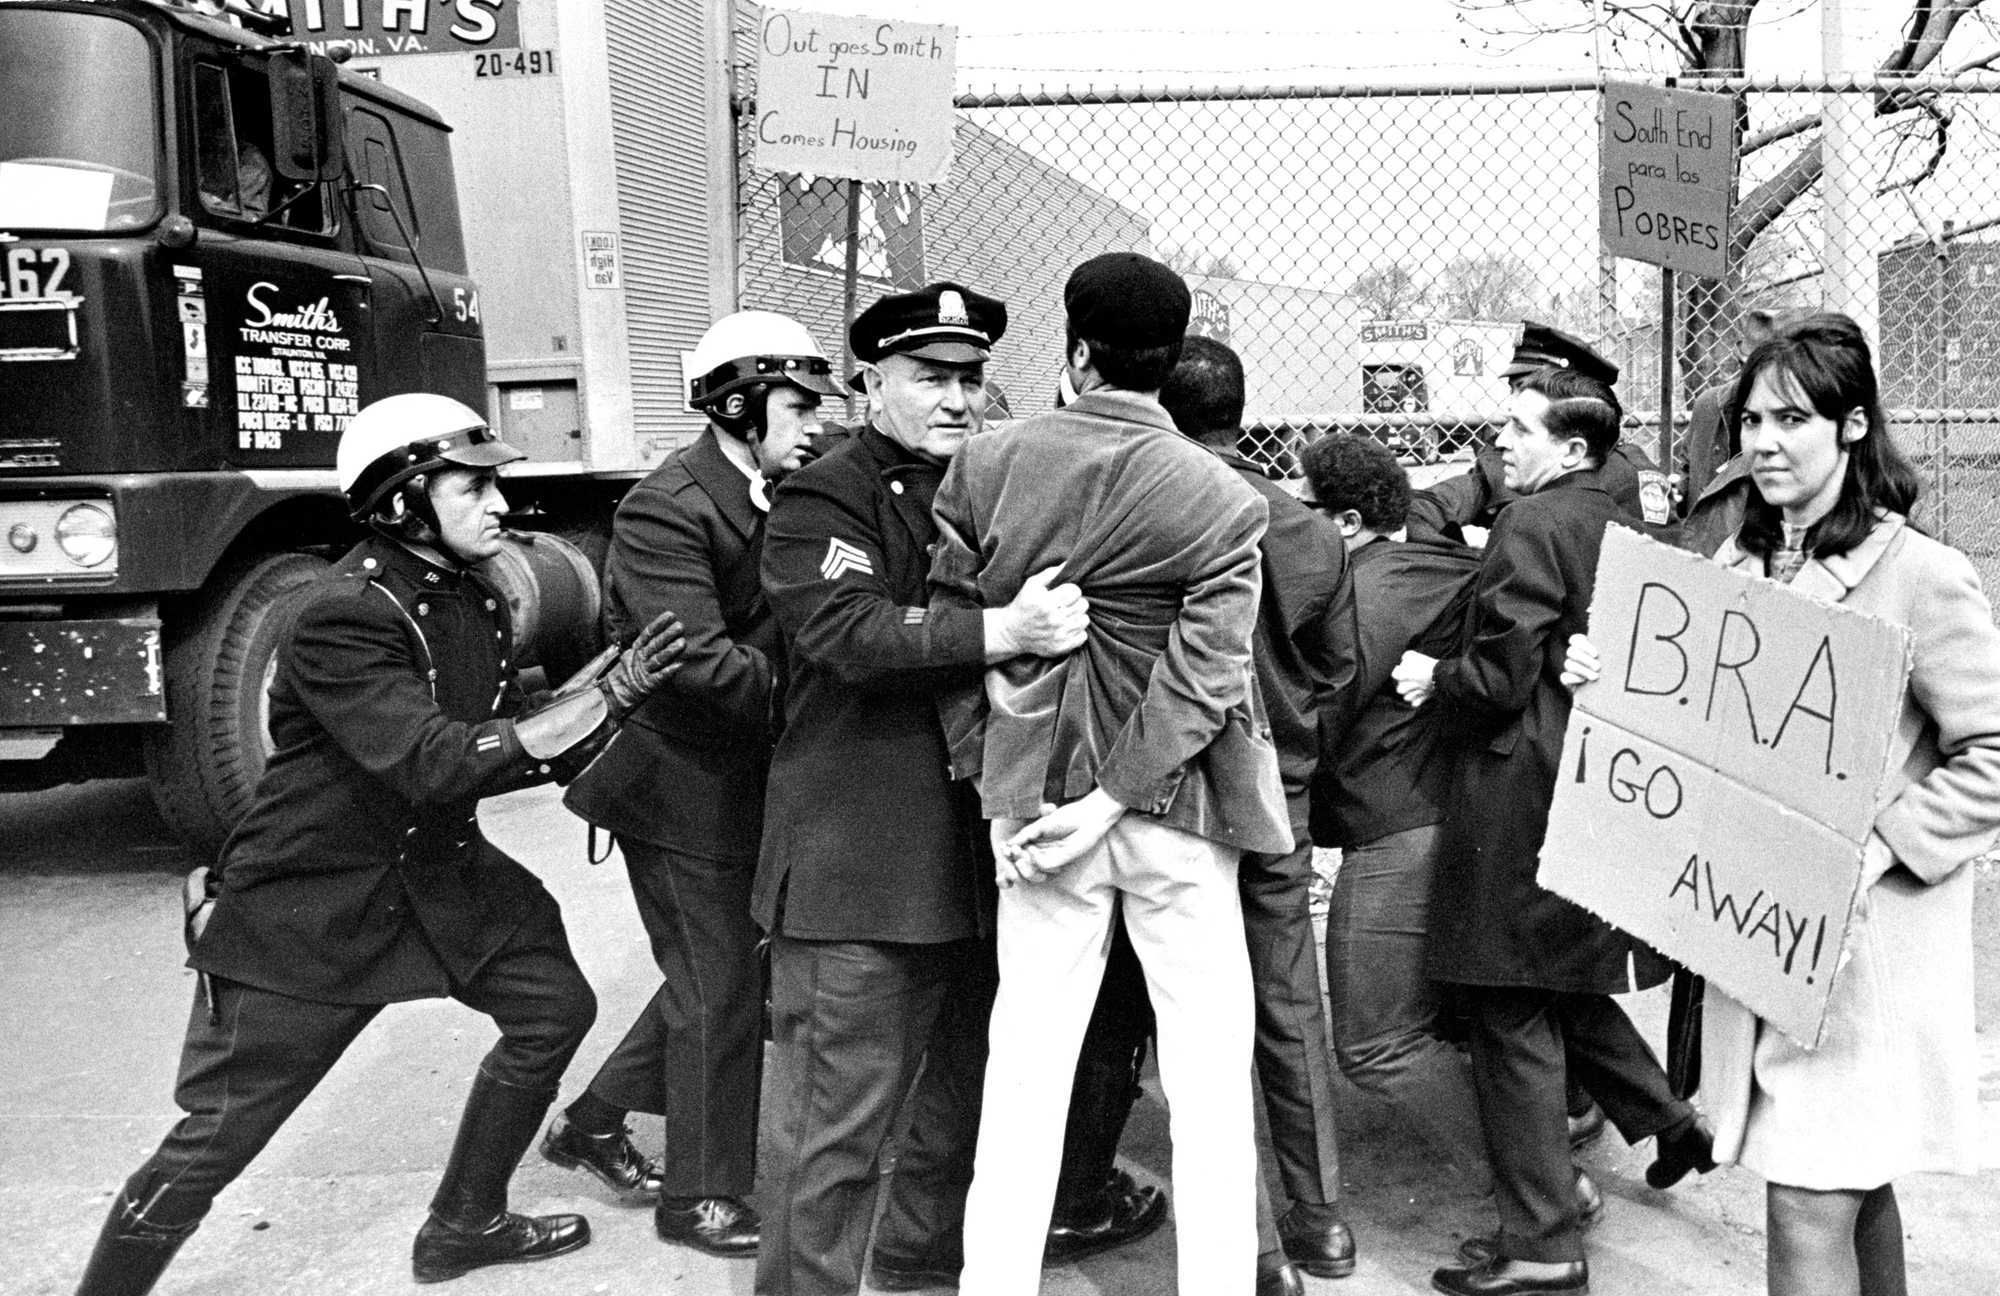 Boston, MA - 4/30/1968: Boston Police force protesters aside so that trucks can move at the Smith Transfer Corp. truck terminal on Tremont Street in the Roxbury neighborhood of Boston on April 30, 1968. Anti-urban renewal demonstrators from the Community Assembly for a Unified South End (CAUSE) were picketing the terminal, demanding that Lenox Street apartments be renovated rather than demolished and that the Smith Transfer property be used as a site for low-rent housing.  (Ollie Noonan Jr./Globe Staff) --- BGPA Reference: 171206_BS_018